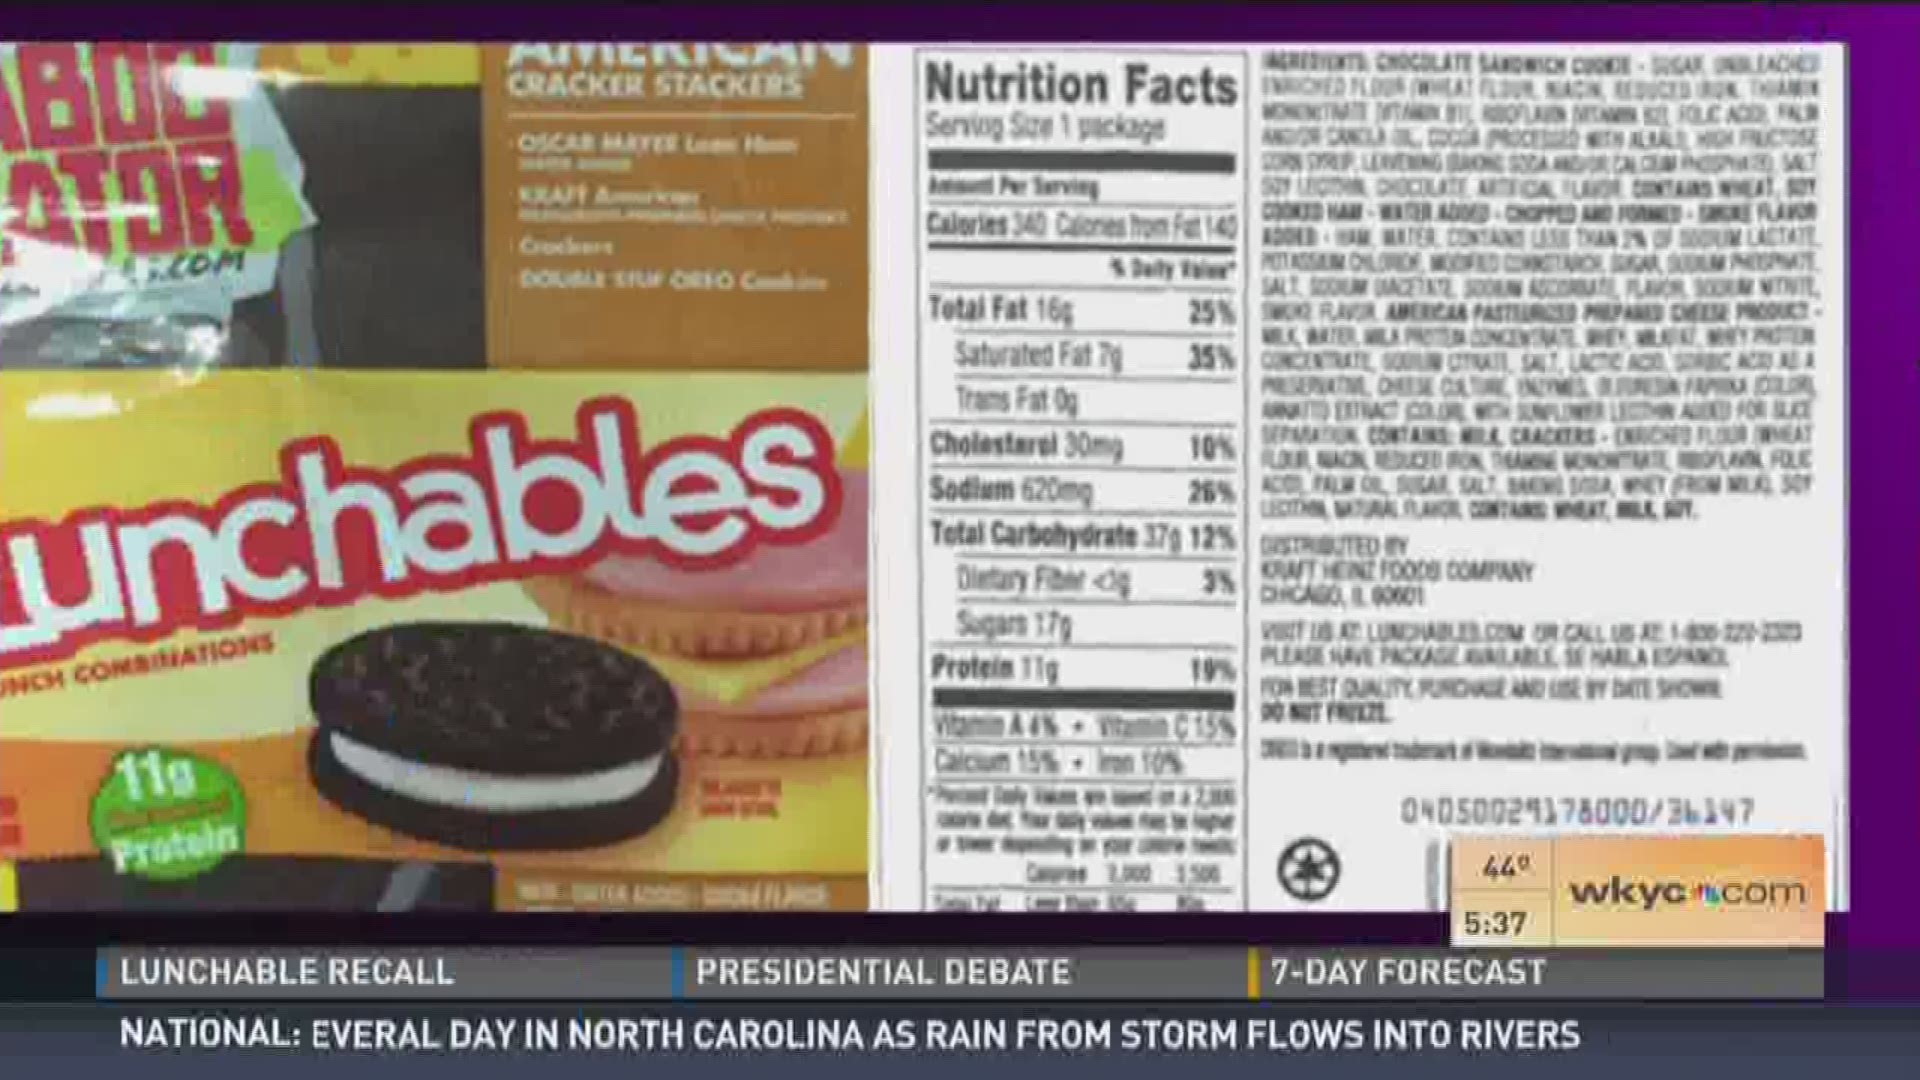 Lunch alert! Lunchables recalled